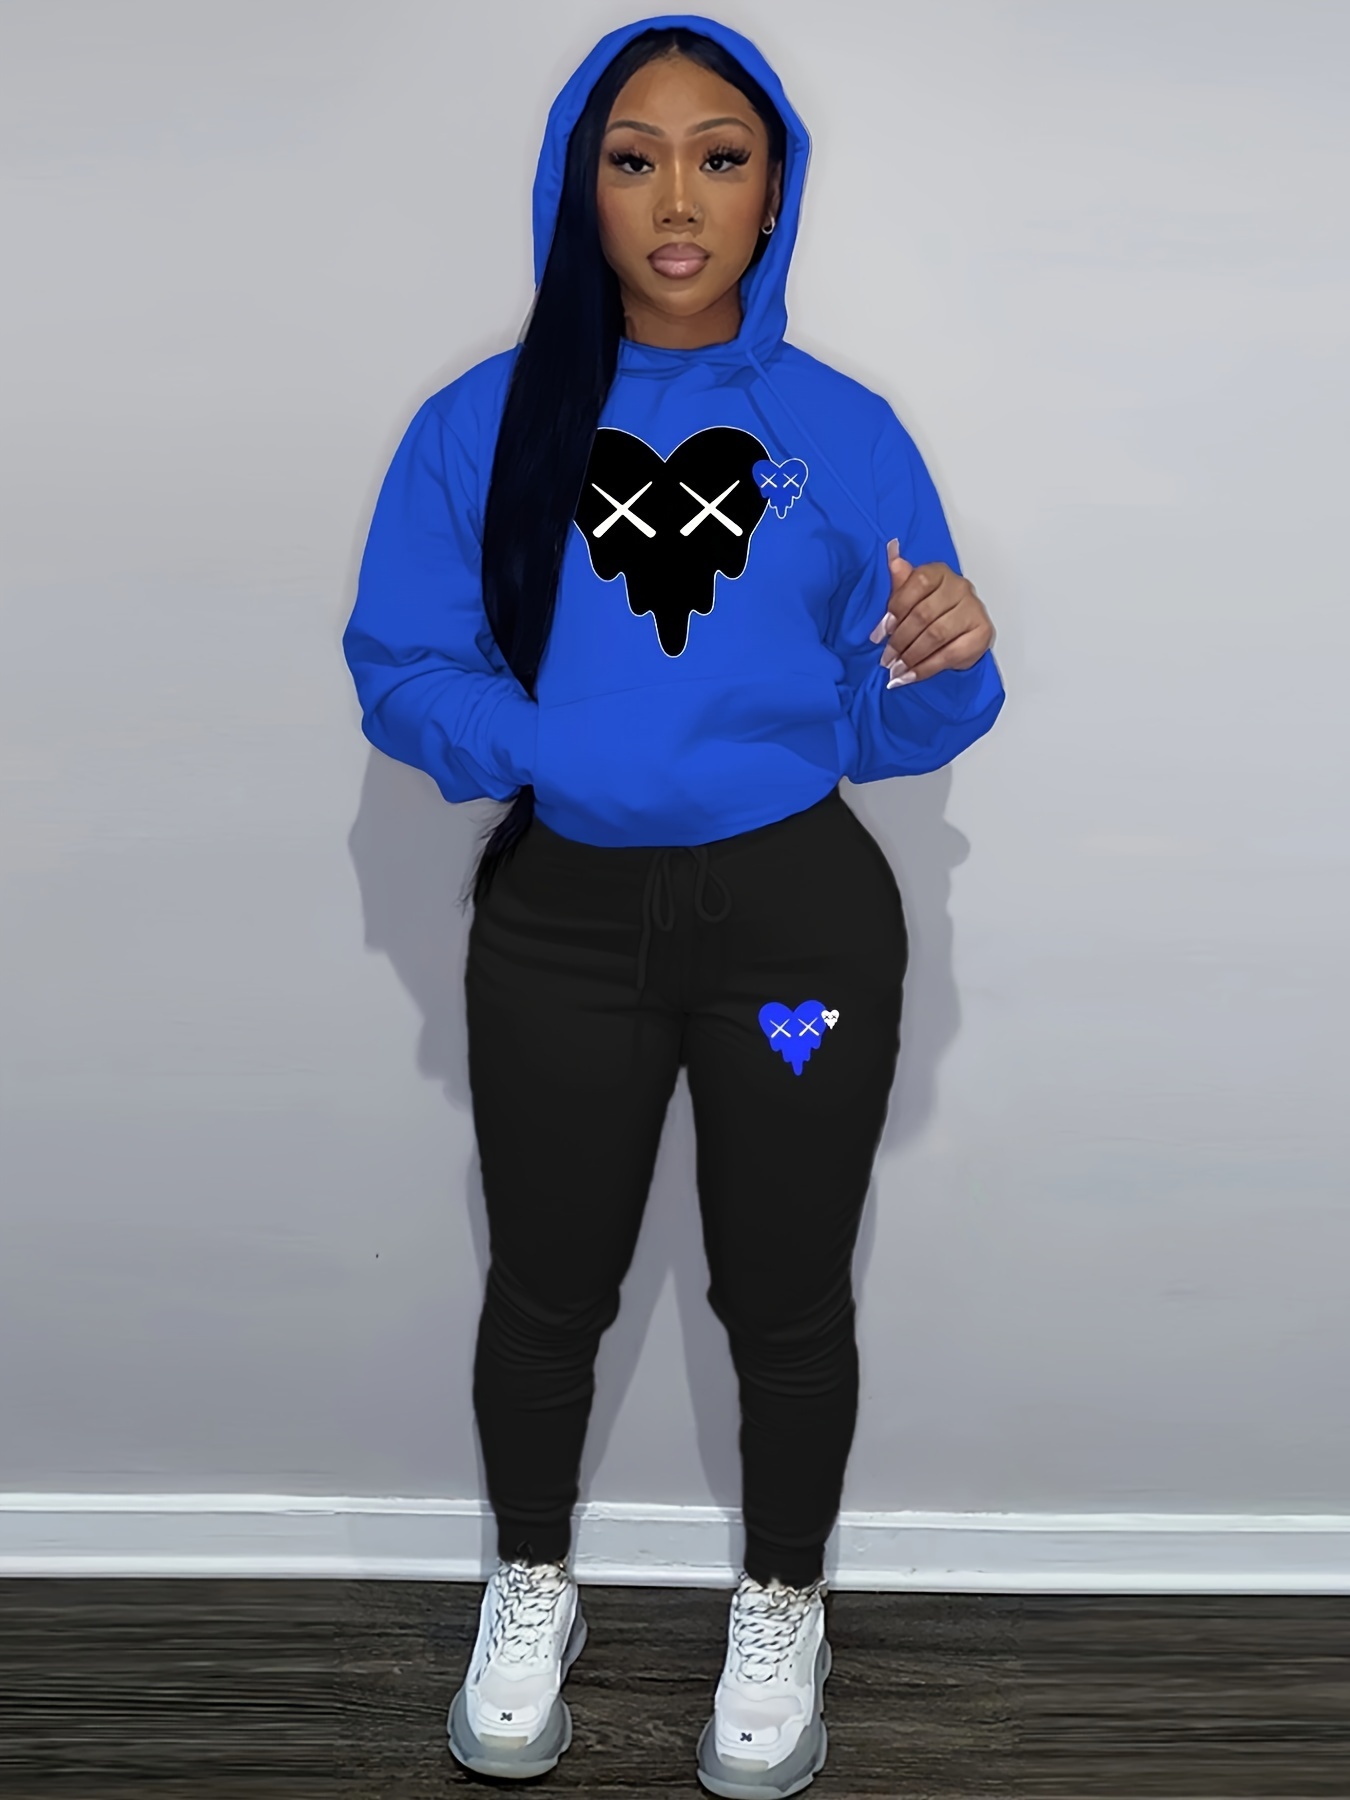 Black Leggings with Blue Athletic Shoes Outfits (2 ideas & outfits)